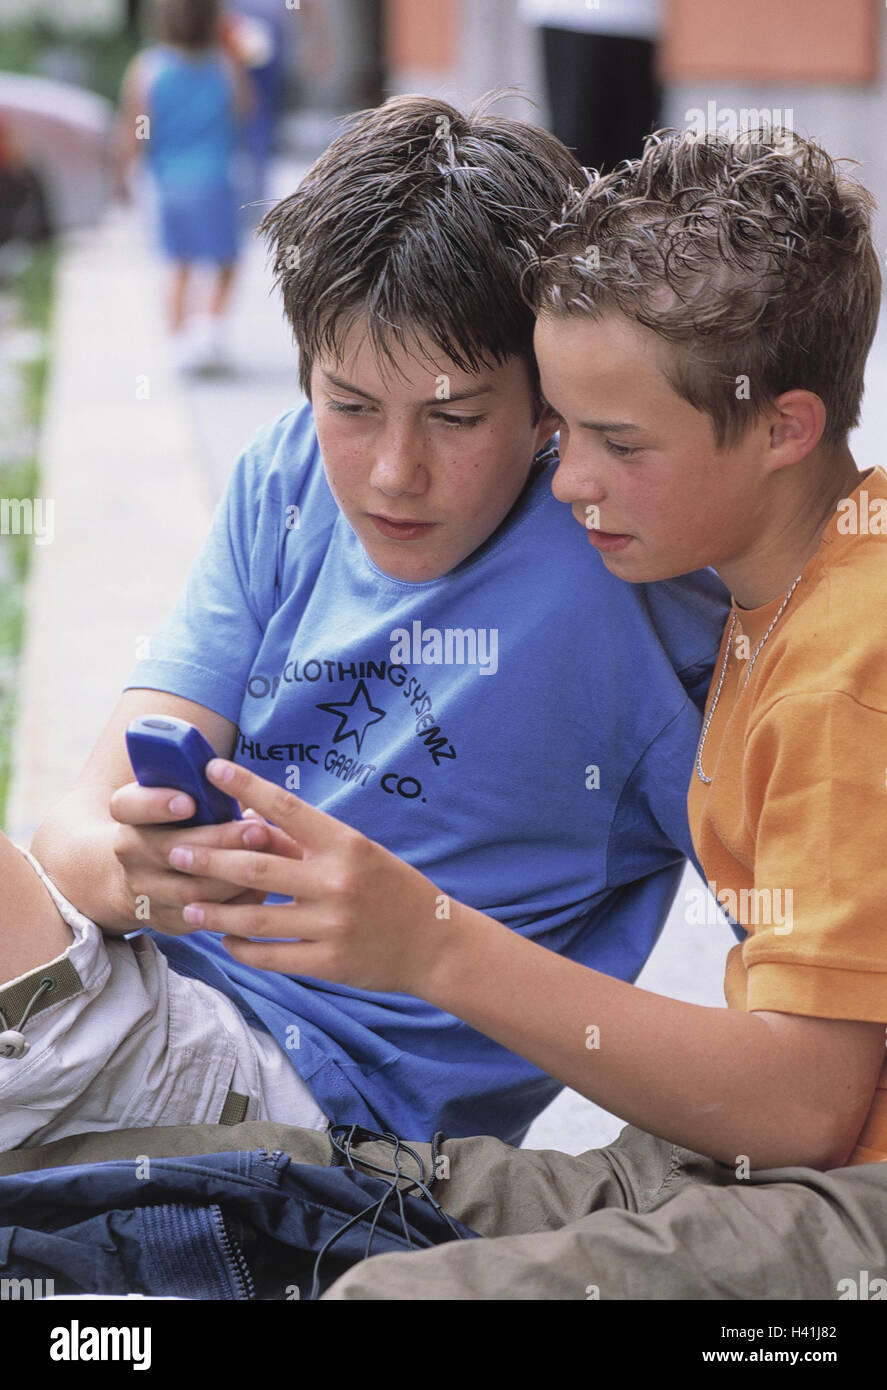 Boys, mobile phone, call up, show SMS summer, outside, children, young persons, teenagers, schoolboys, two, school companion, school friends, friendship, comradeship, mate, friends, leisure time, school end, holidays, entertainment, short communication, m Stock Photo